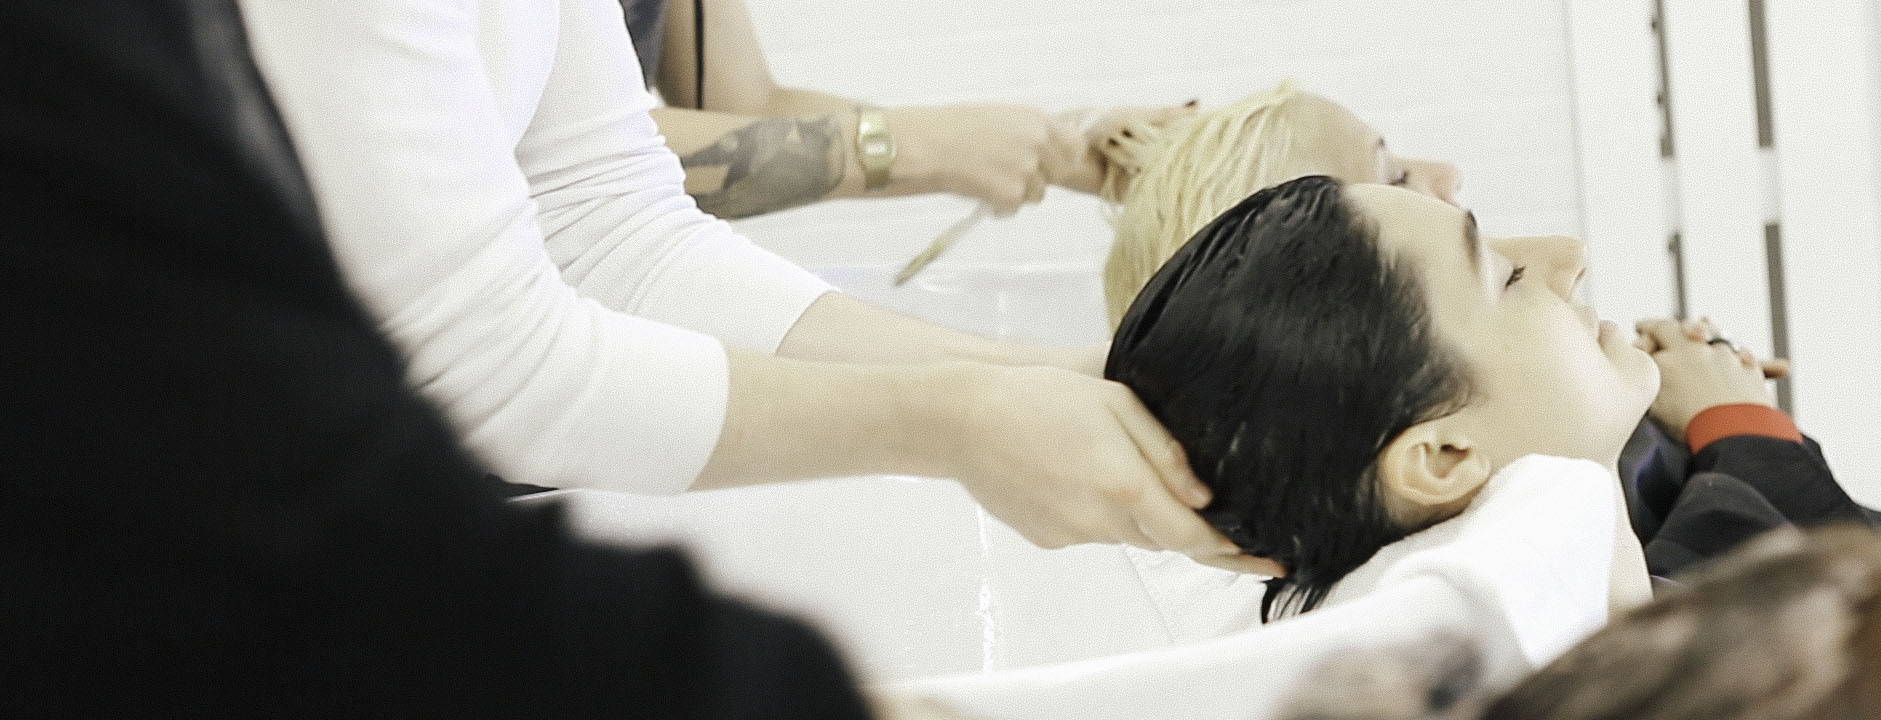 stylists hands shampooing clients in the sink